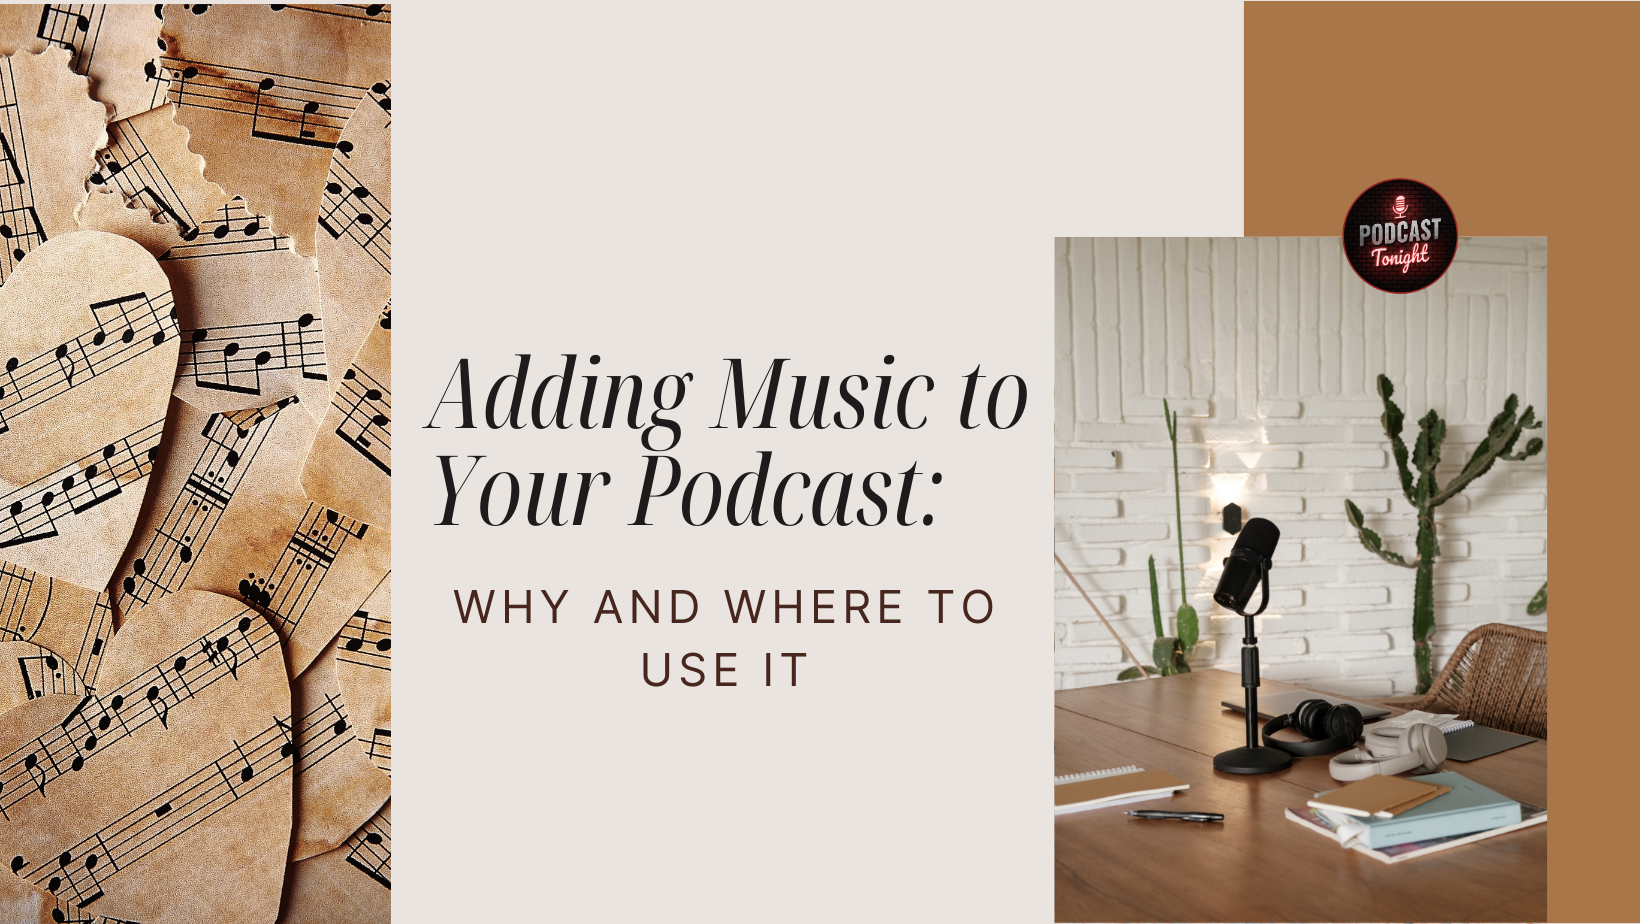 Adding Music to Your Podcast